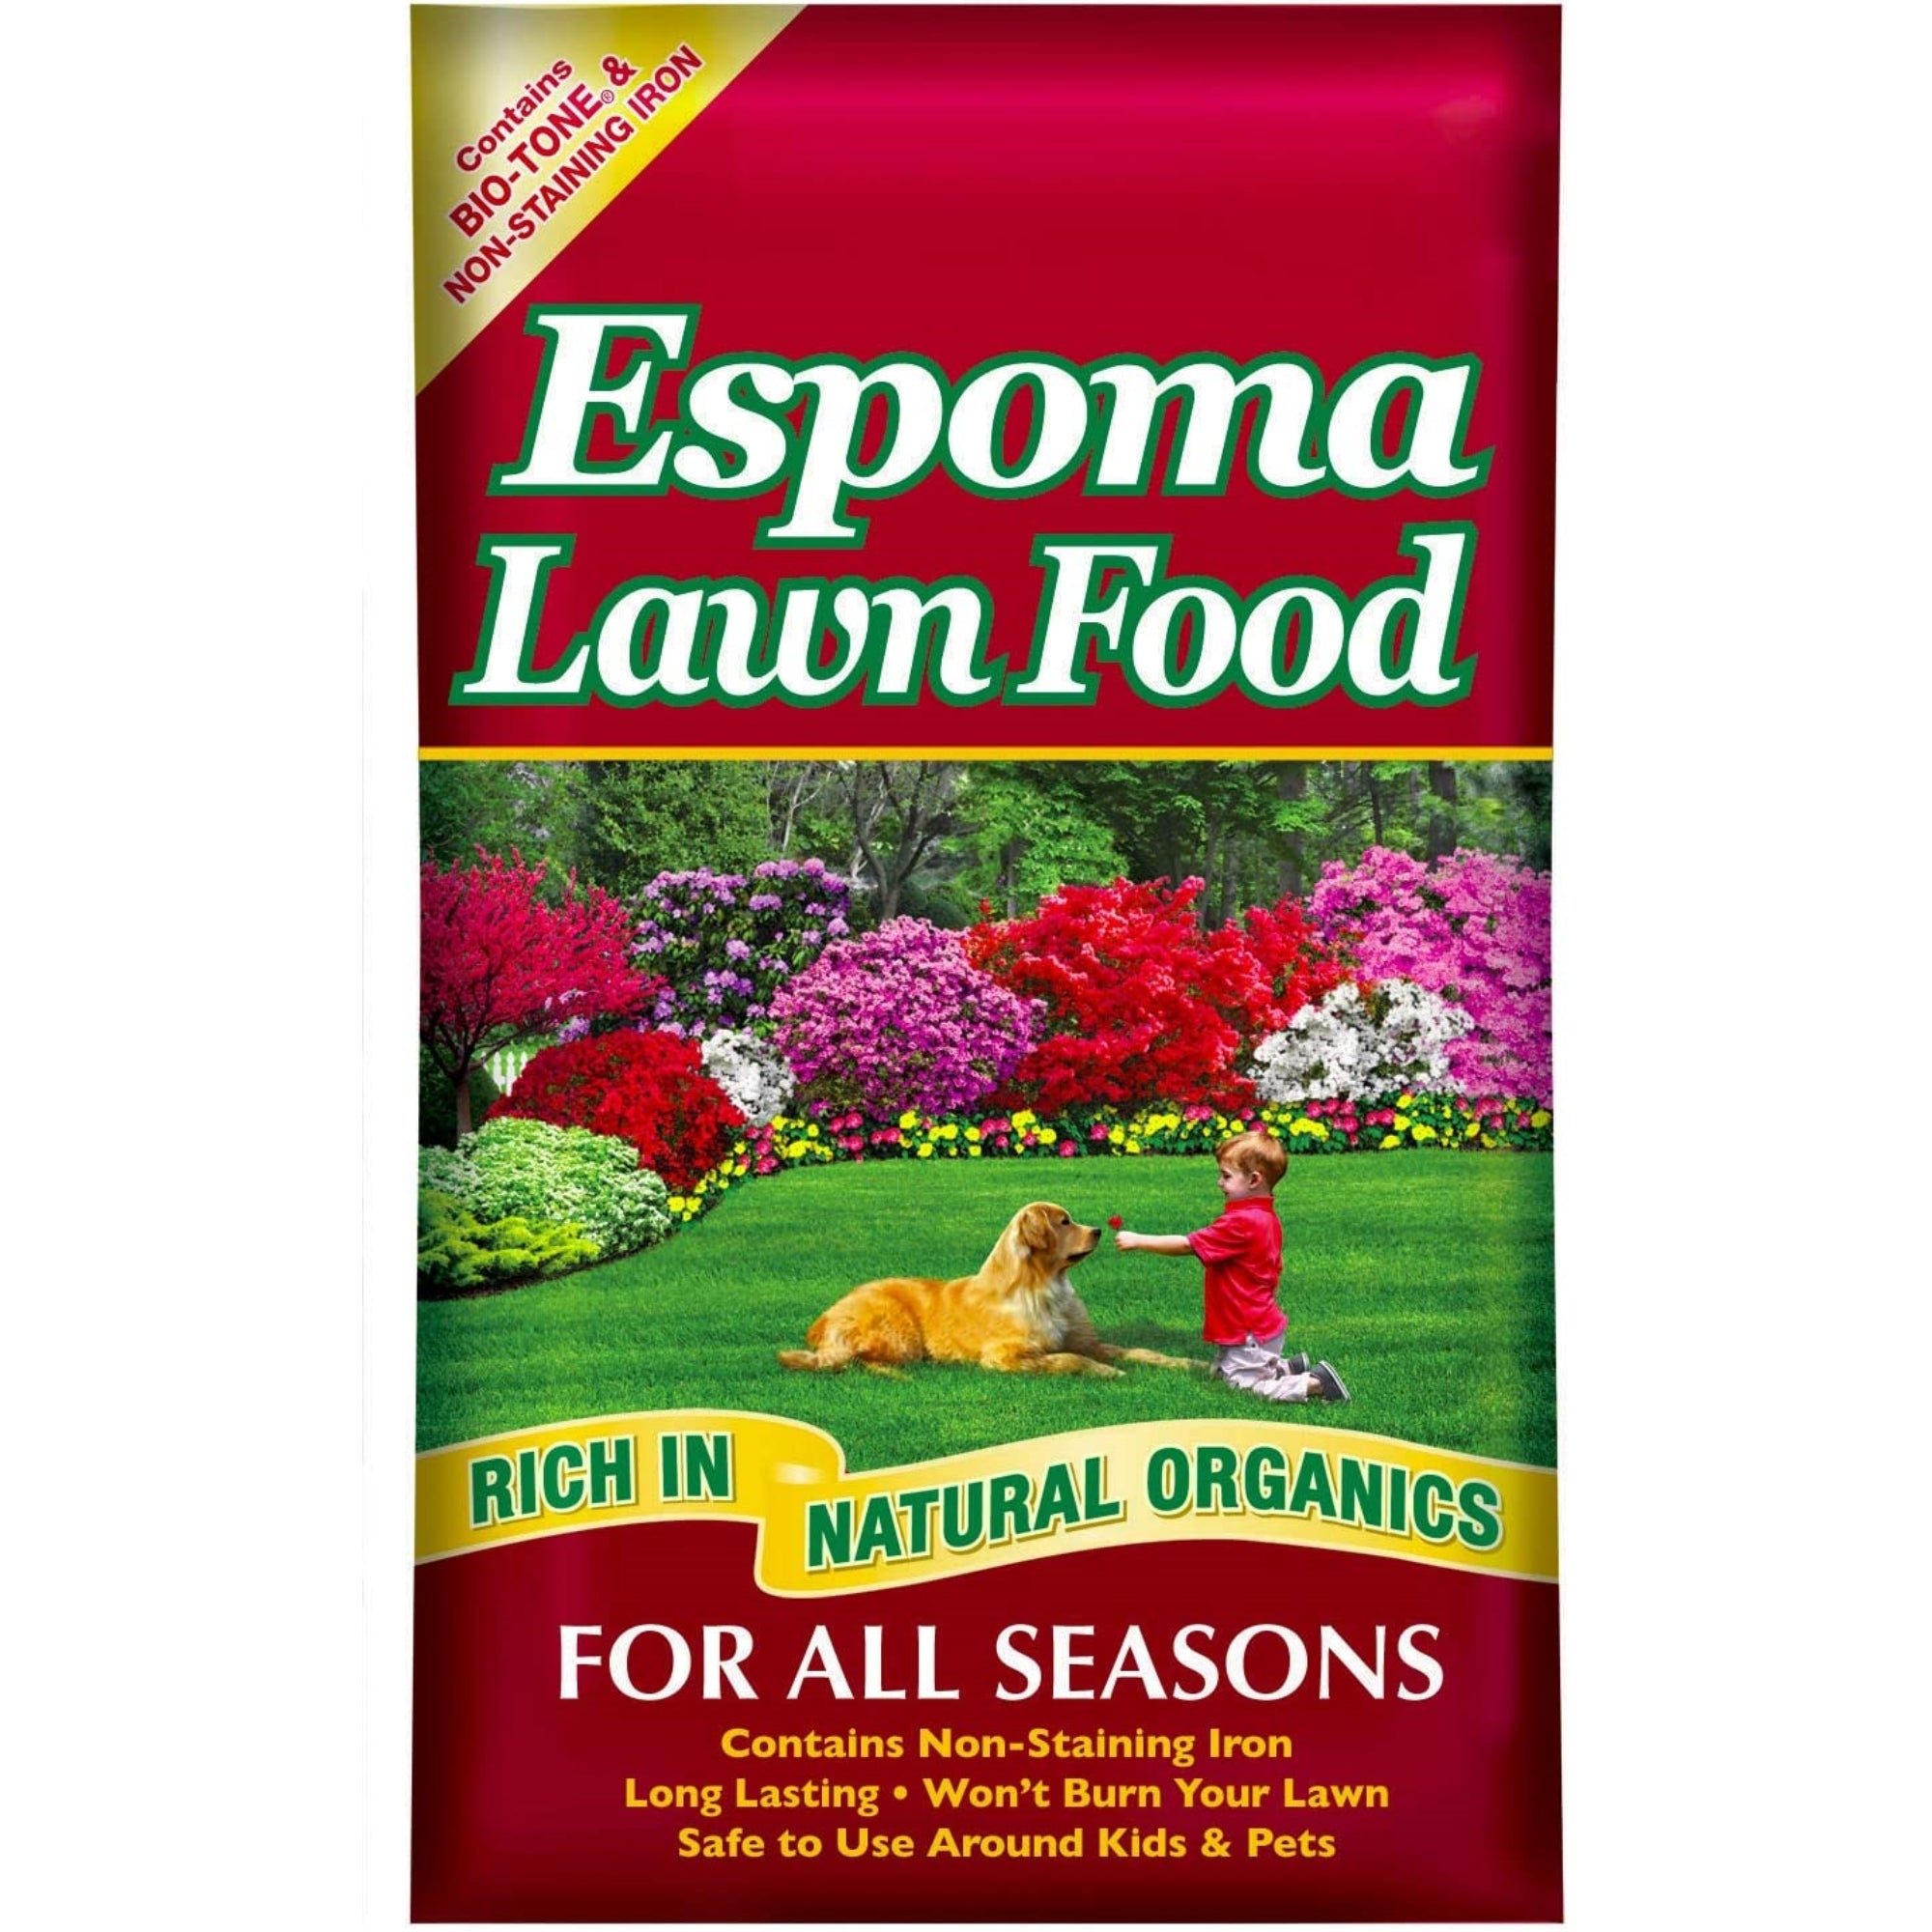 Espoma 15-0-5 Lawn Food for All Seasons, Rich in Natural Organics, Contains Bio-tone & Non-Staining Iron